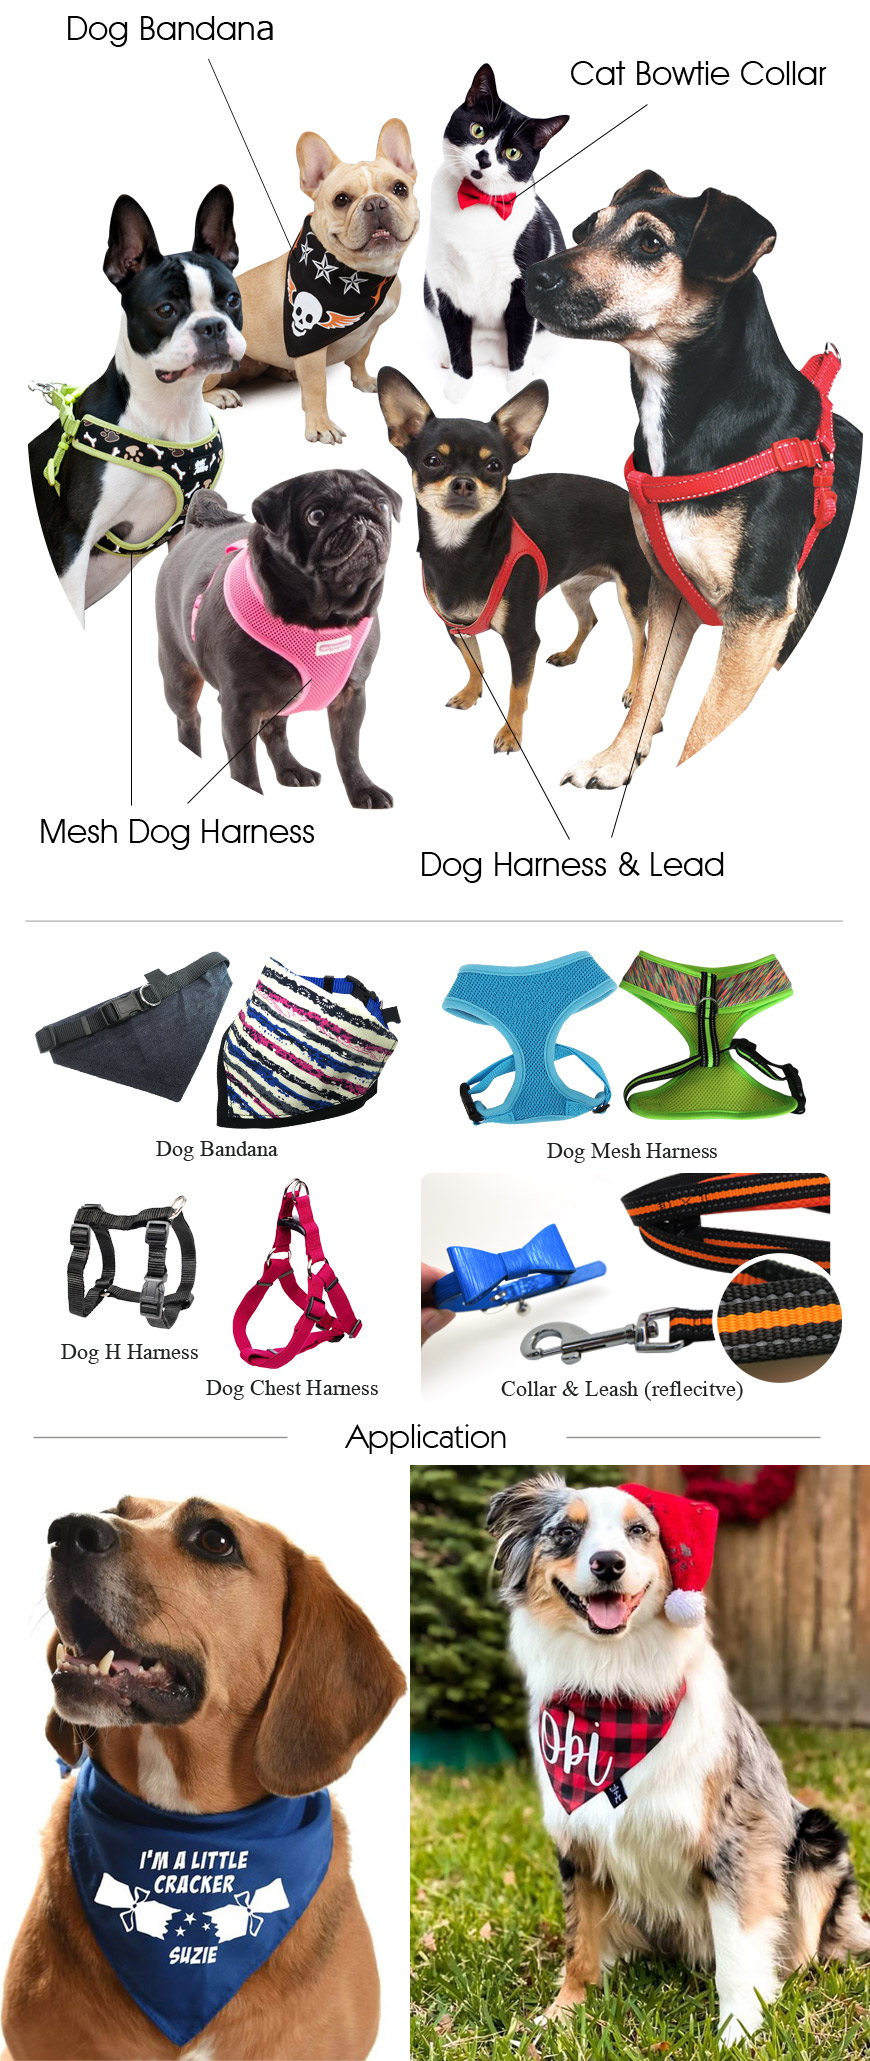 wholesale pet accessories, dog collars and leashes